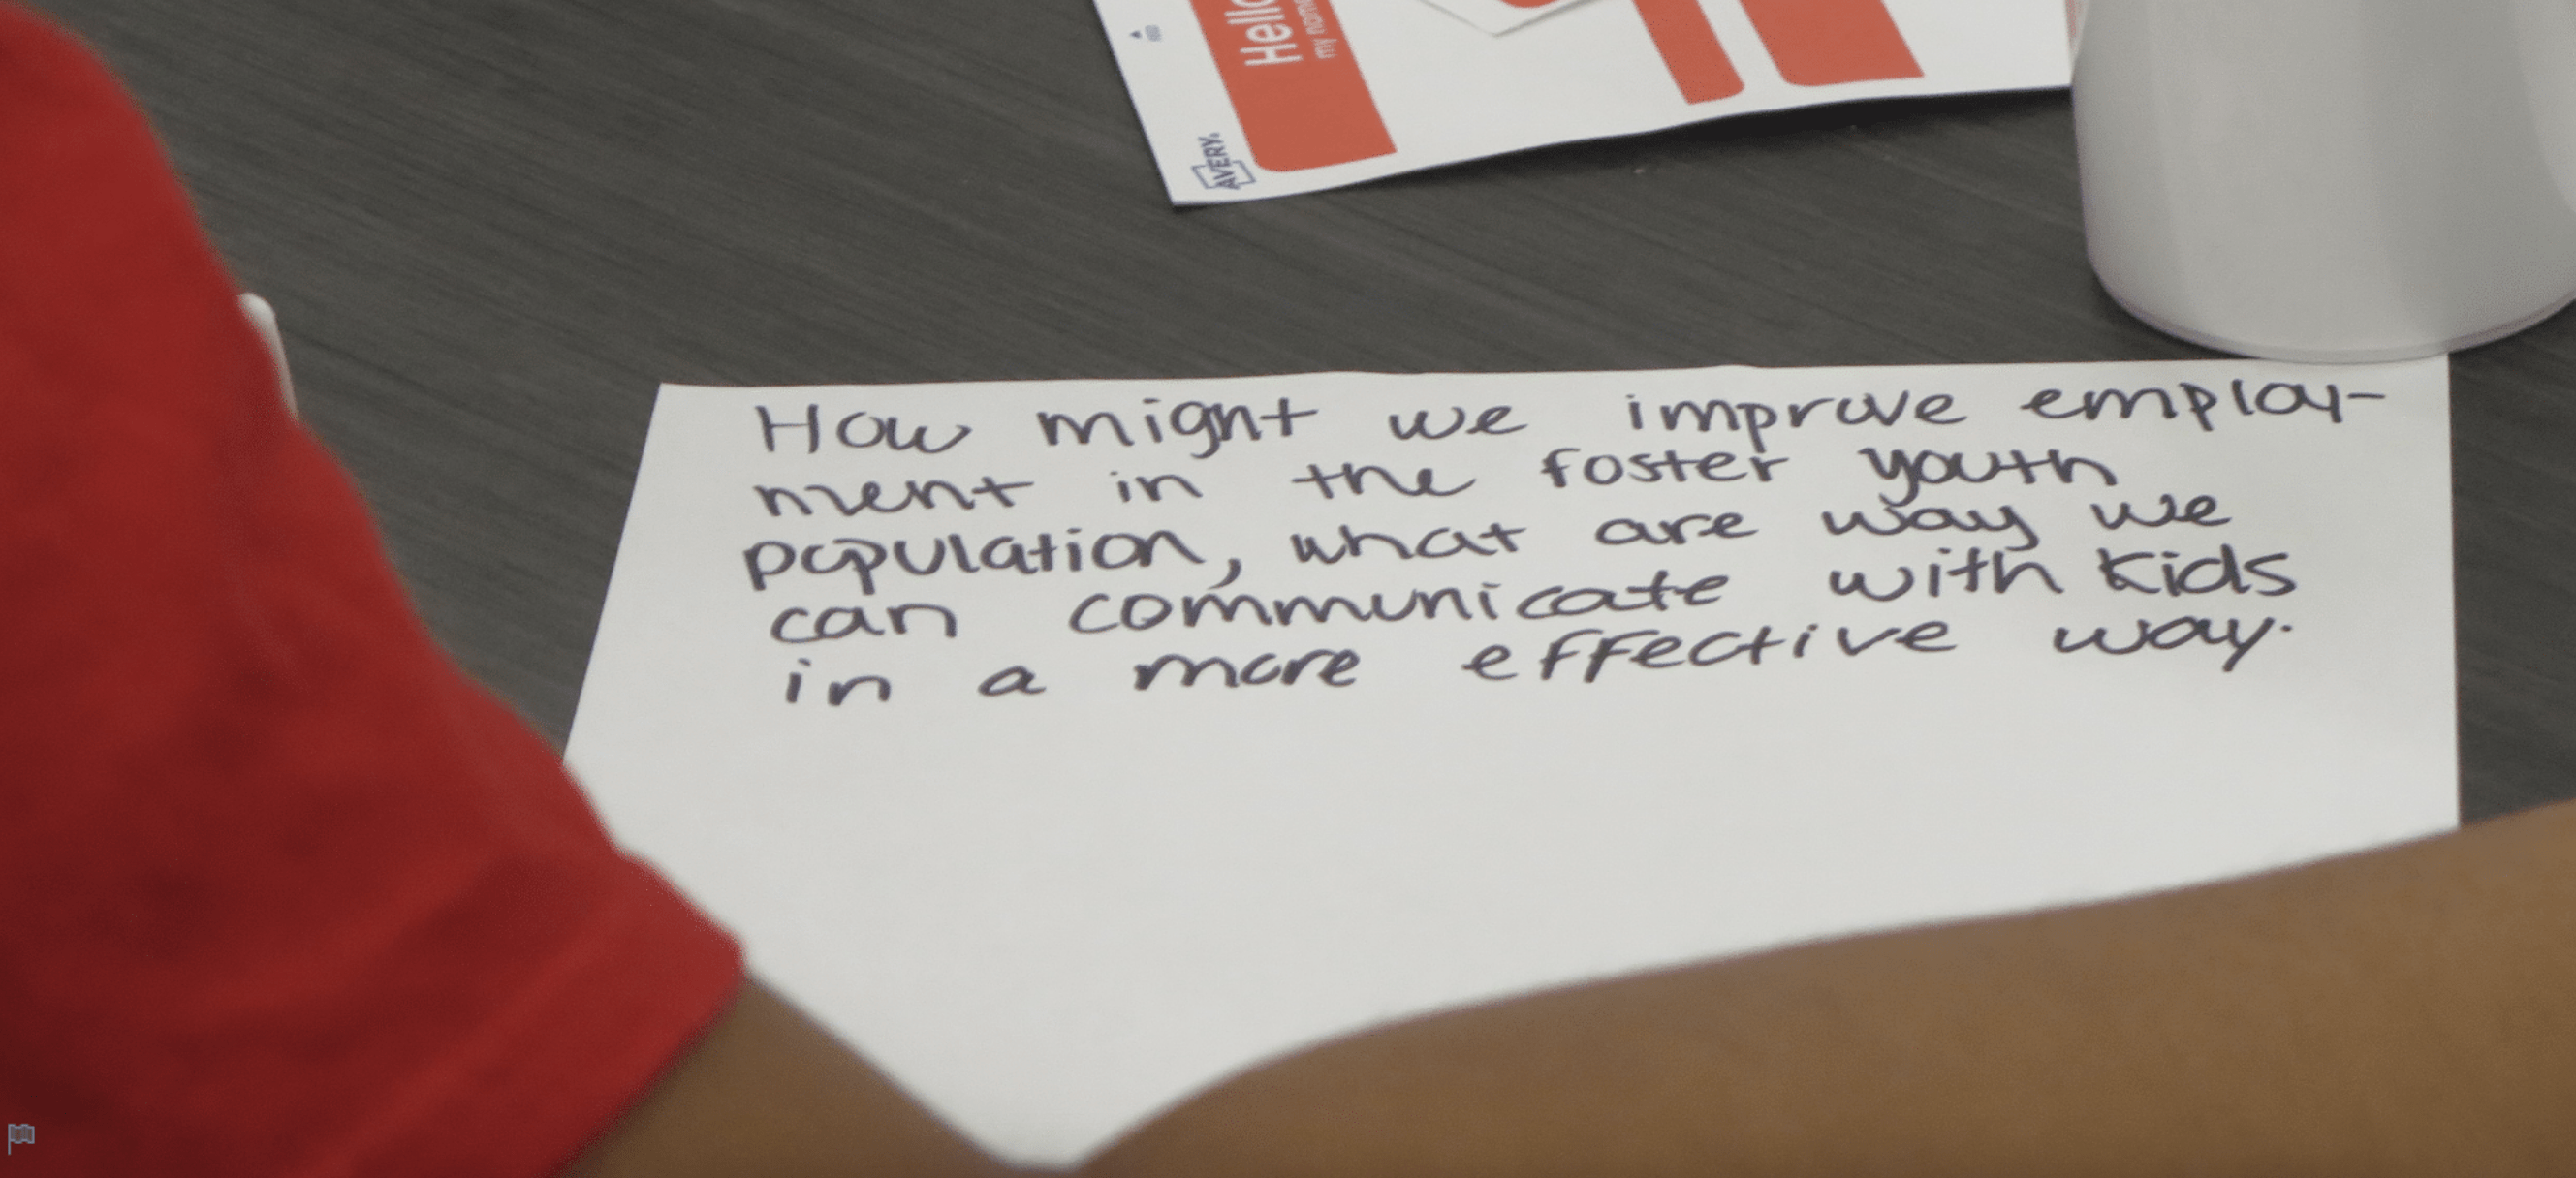 Index card with handwritten text saying: "How might we improvement employment in the foster youth population, what are ways we can communicate with kids in a more effective way."